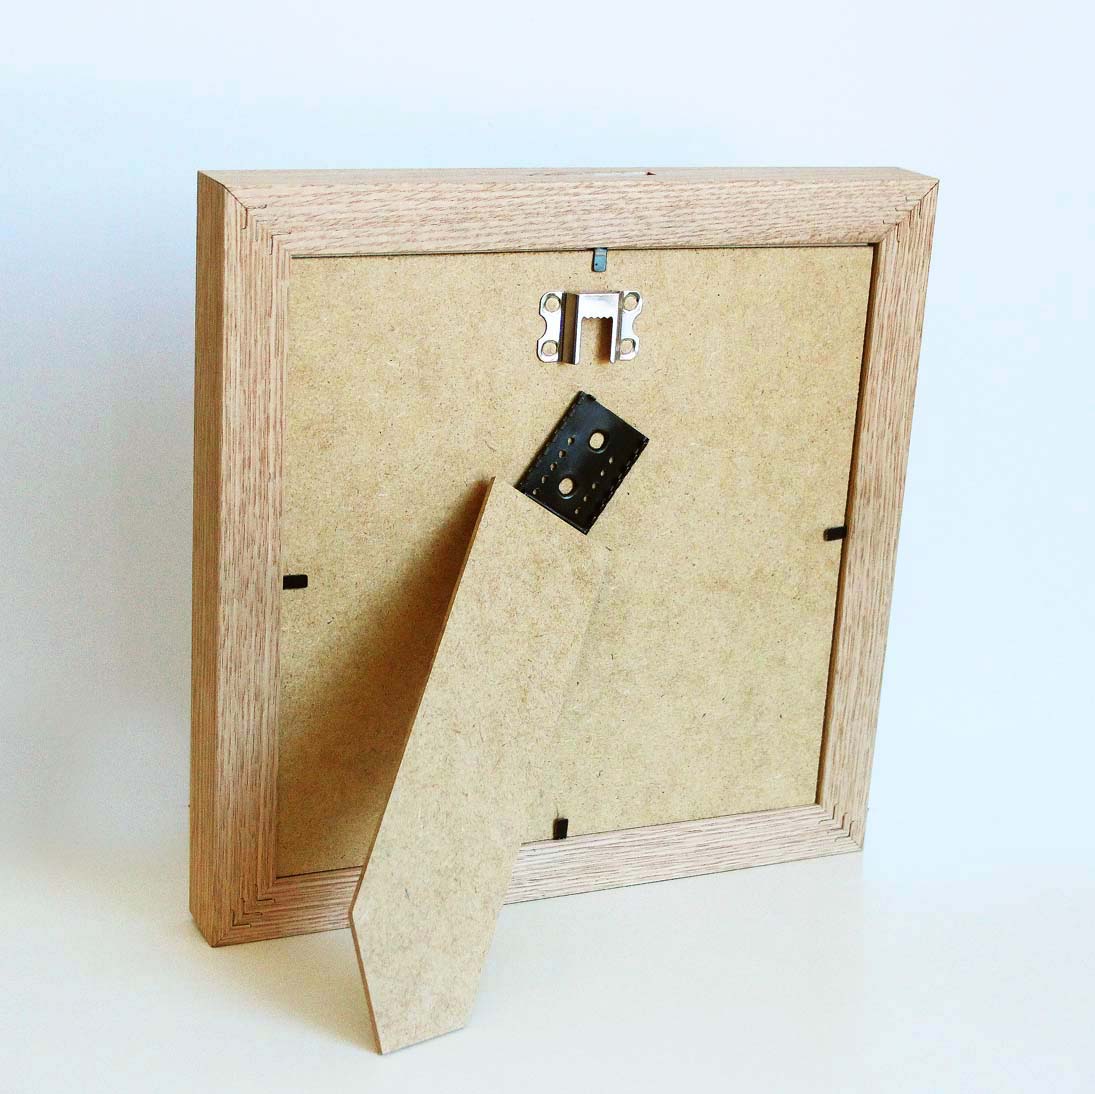 Oak wood frame made as money box, with 3D effect and slot for money, backside with adjustable easel and sawtooth hanger. Picture frame producer Debex Suisse.